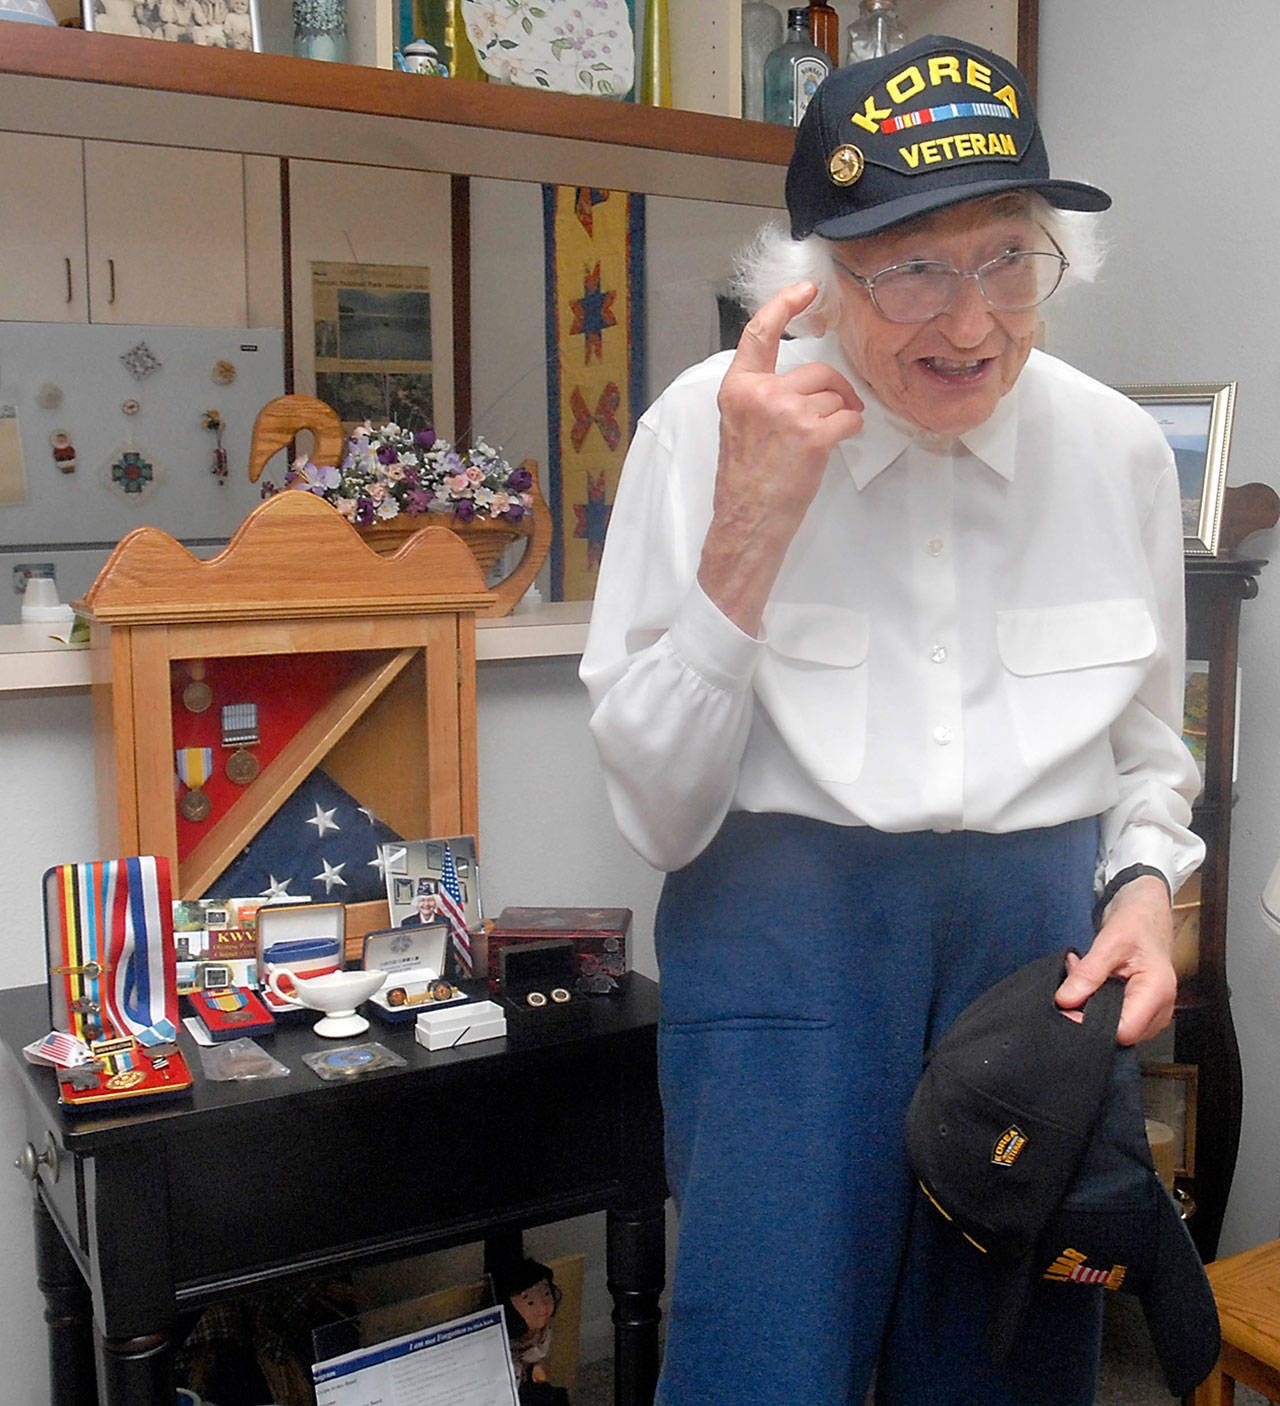 Mary Reid of Port Angeles, 90, a U.S. Army veteran of the Korean War, shows of one of her many caps that distinguish her service to her country. (Keith Thorpe/Peninsula Daily News)